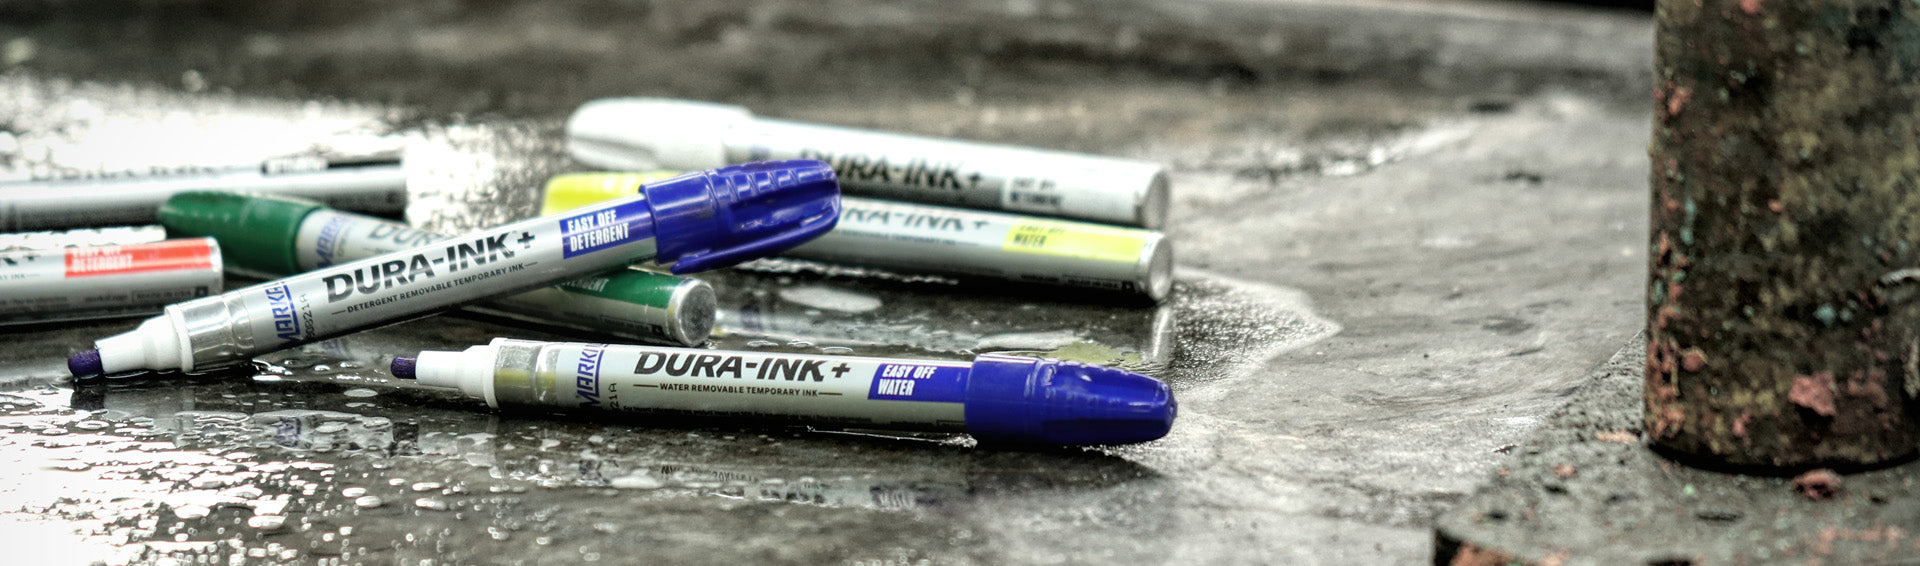 DURA-INK+ Easy Off Water Removable Ink Marker –